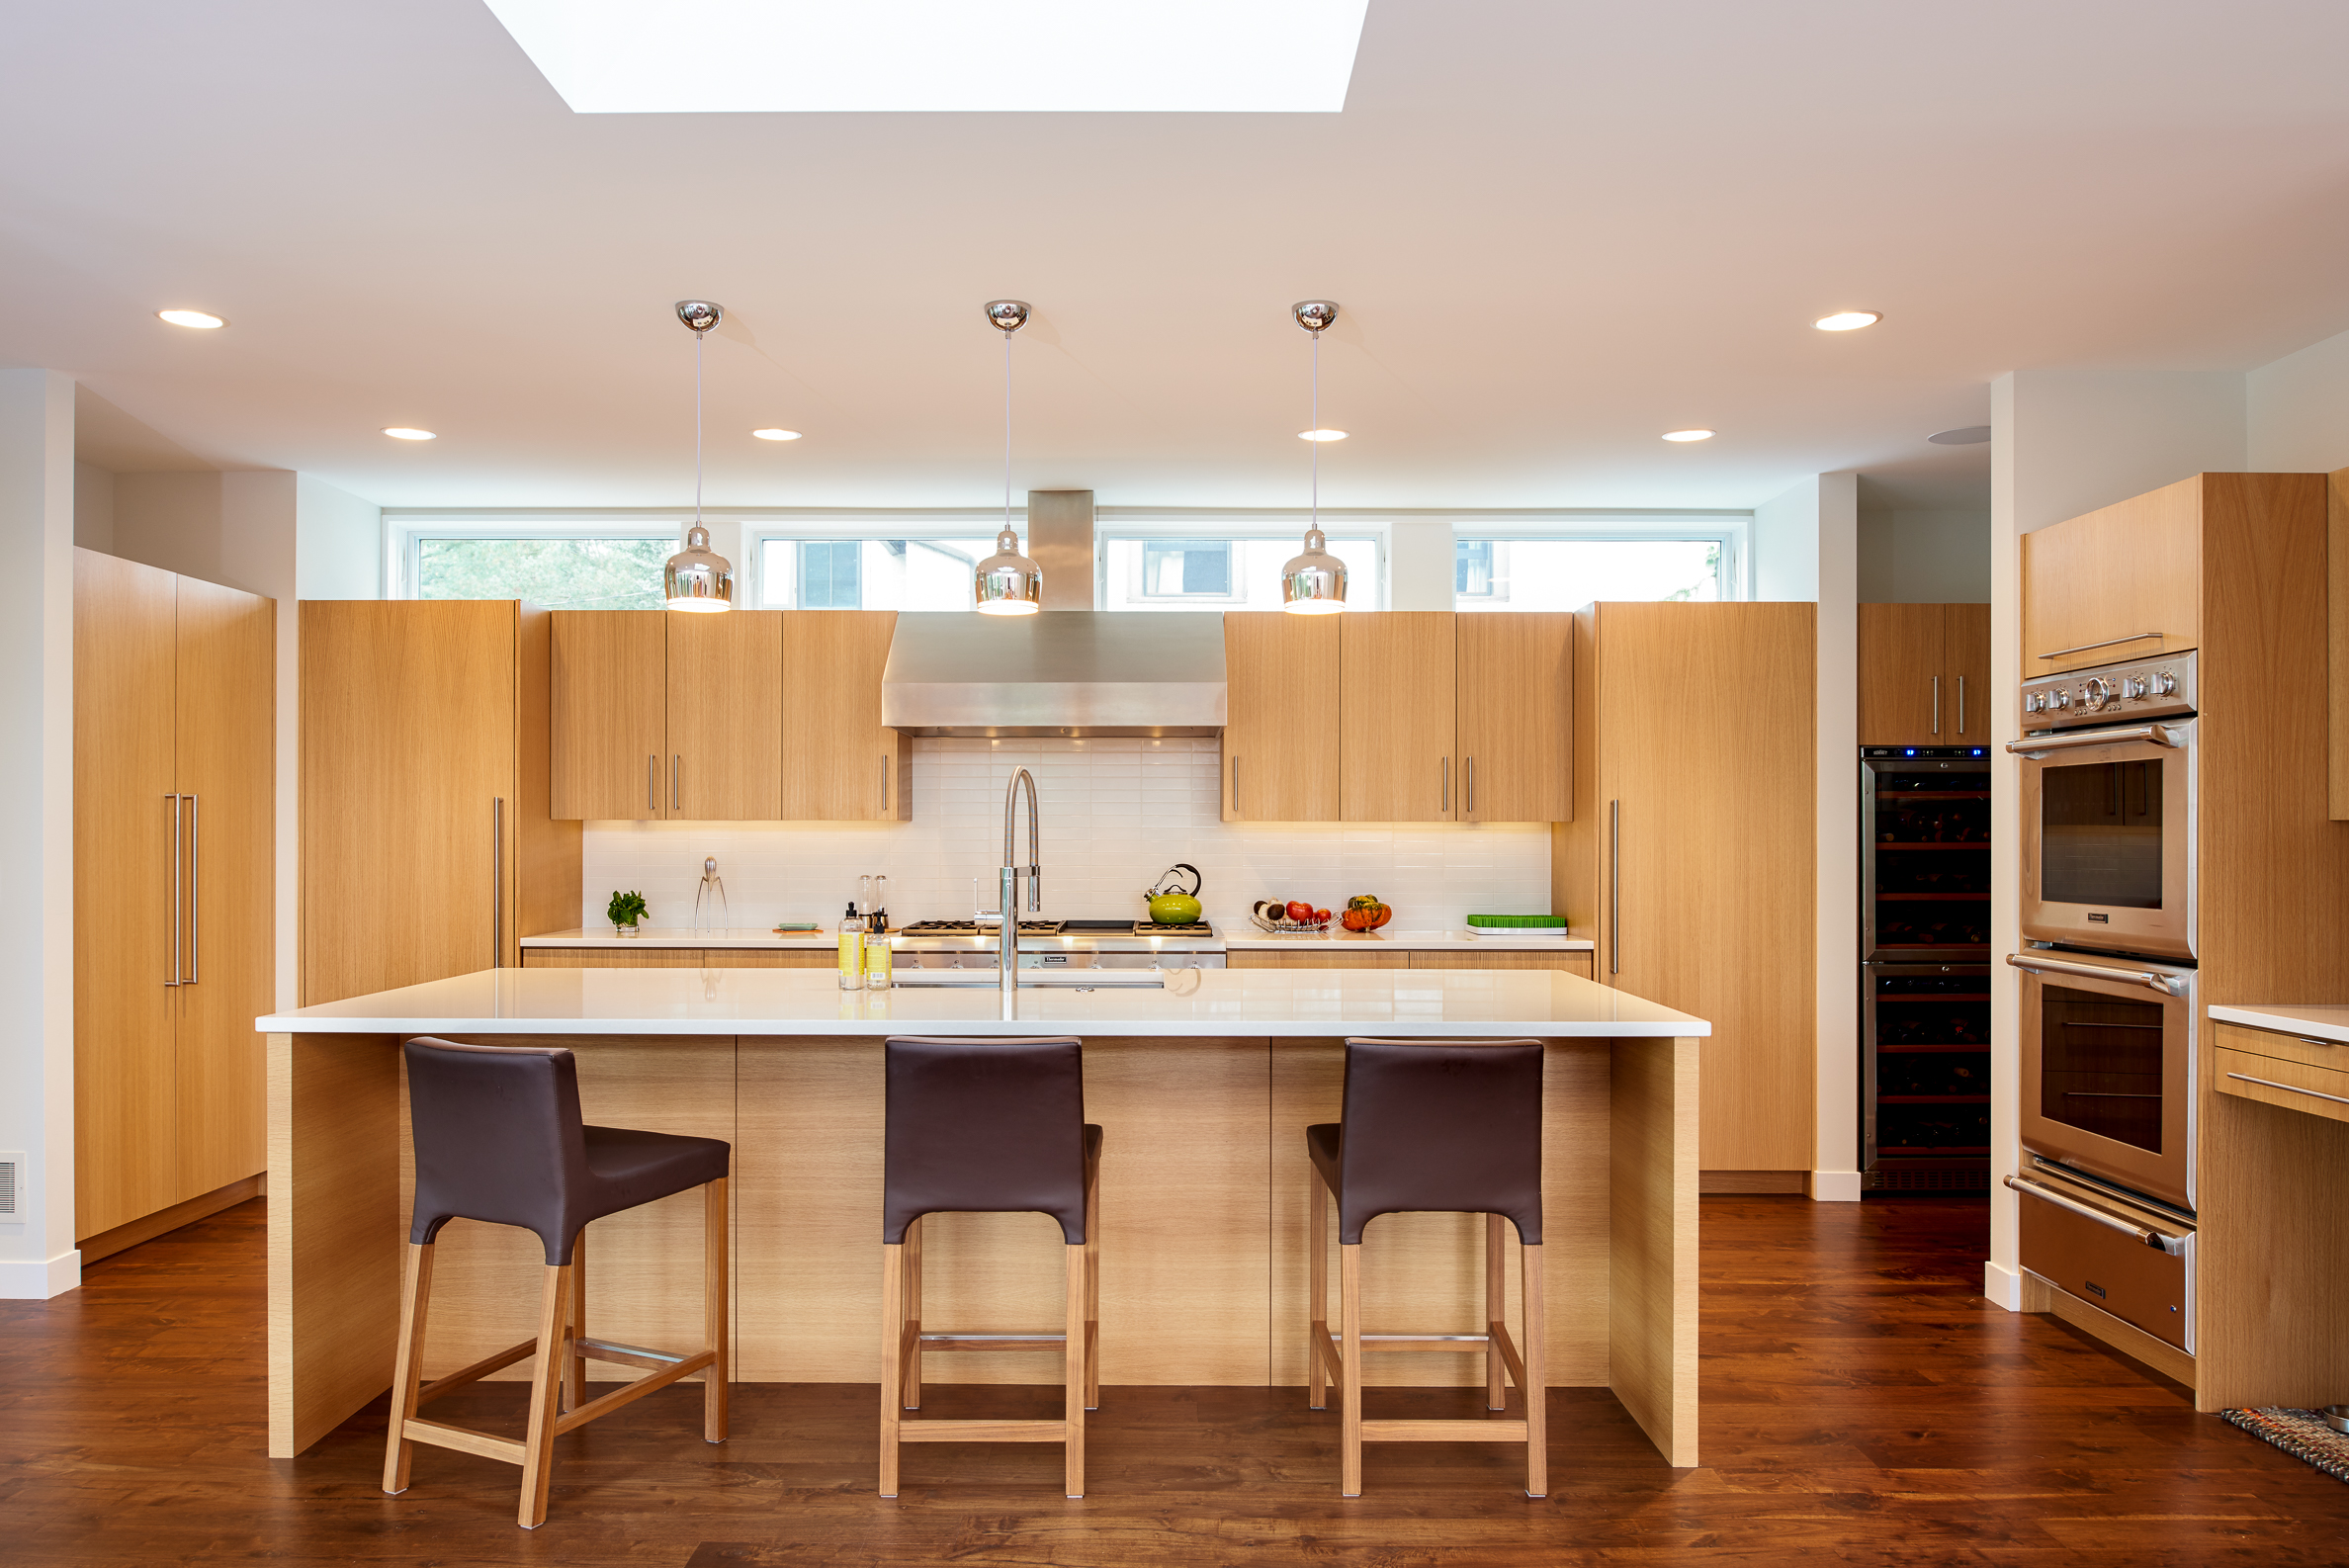 Modern midcentury kitchen with clerestory windows and skylight